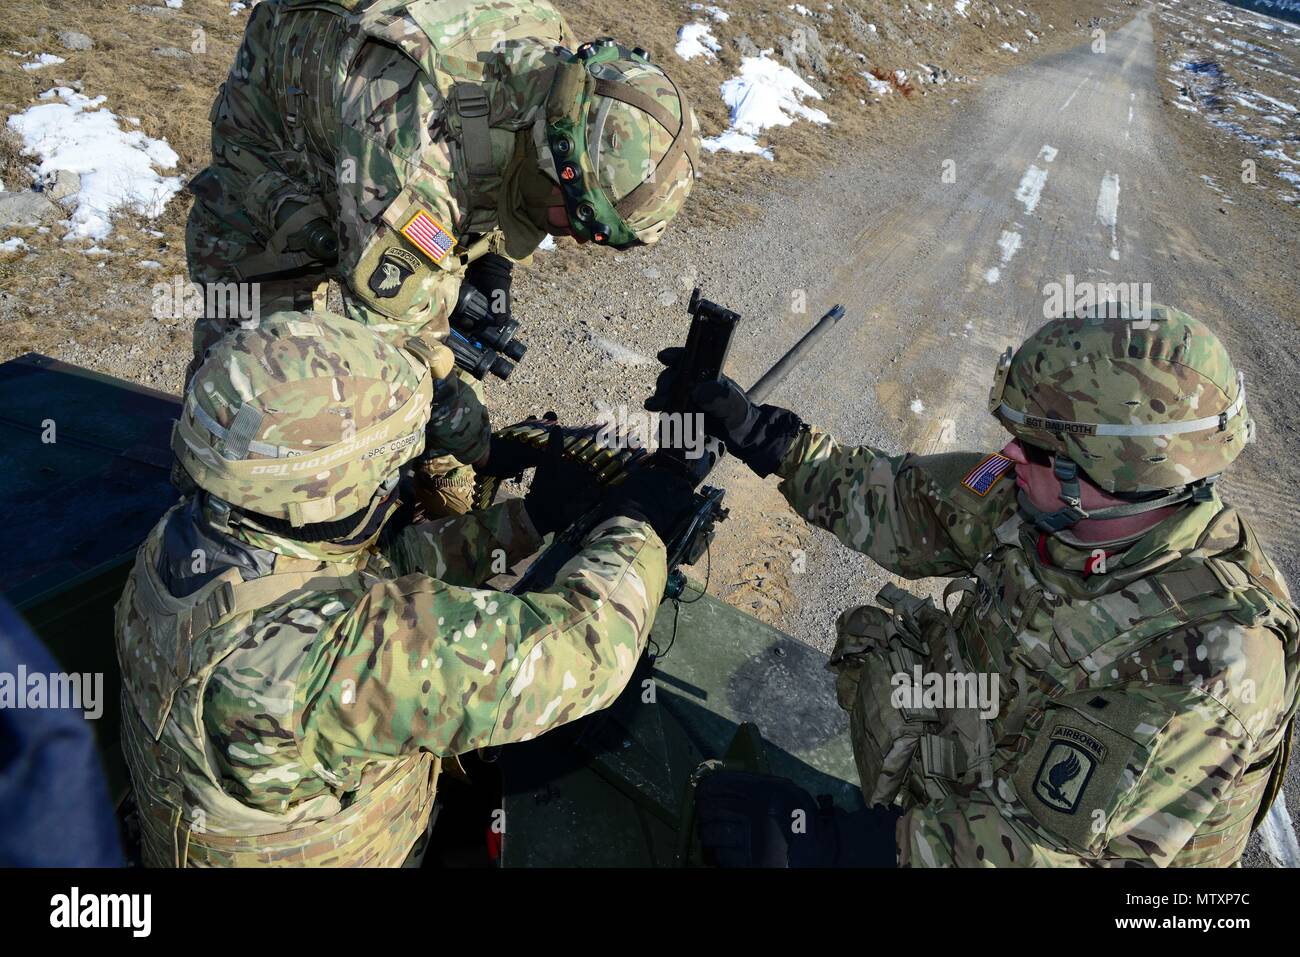 U.S. Army paratroopers from the 173rd Brigade Support Battalion, 173rd Airborne Brigade load  their .50-caliber machine gun before qualification during Exercise Lipizzaner III in Bac, Slovenia, on Jan. 25, 2017. Lipizzaner is a combined squad-level training exercise in preparation for platoon evaluation, and to validate battalion-level deployment procedures. (U.S. Army photo by Massimo Bovo) Stock Photo